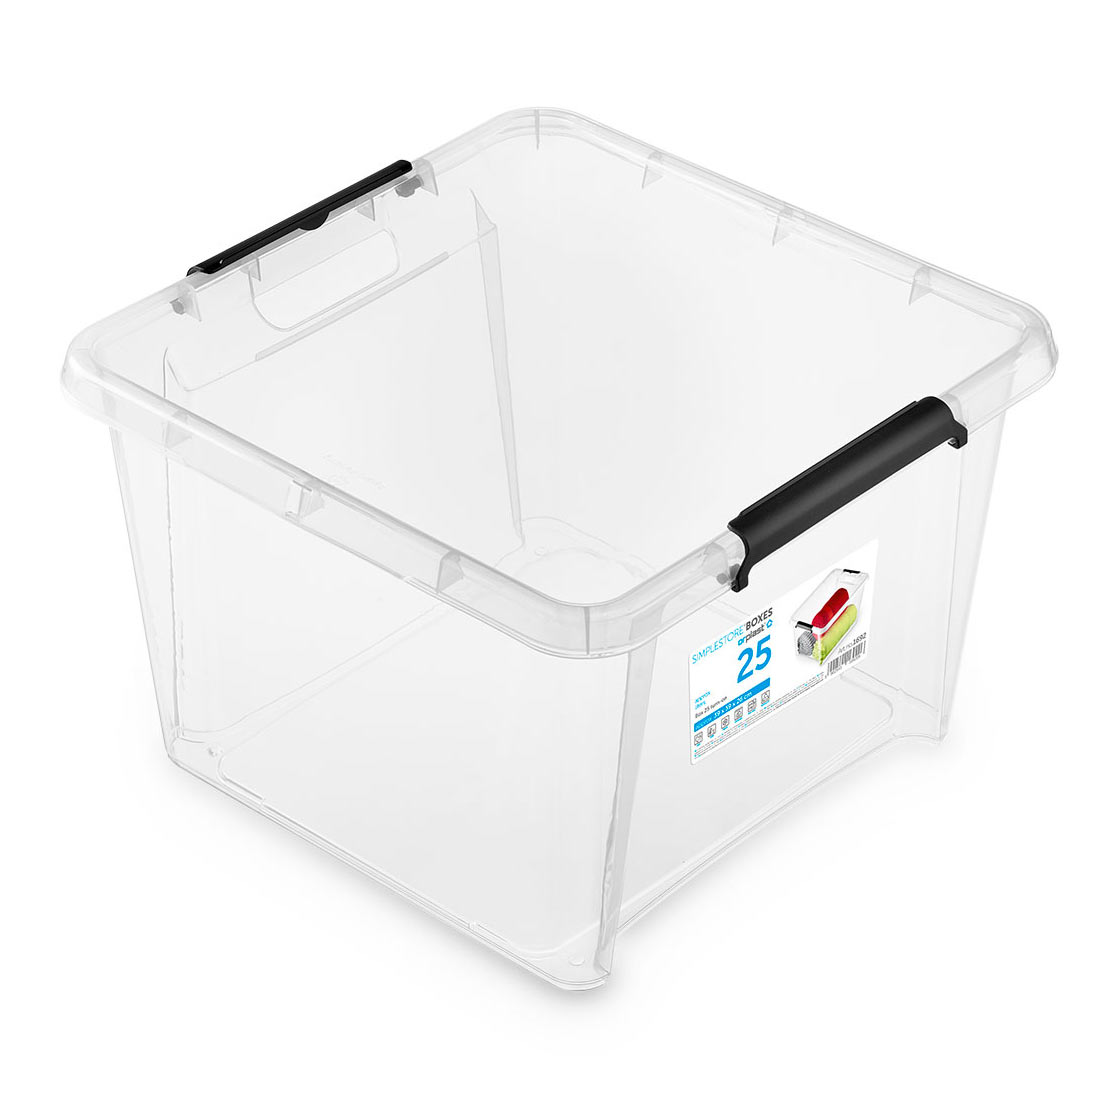 SimpleStore Turn-on storage container 1692 Transparent